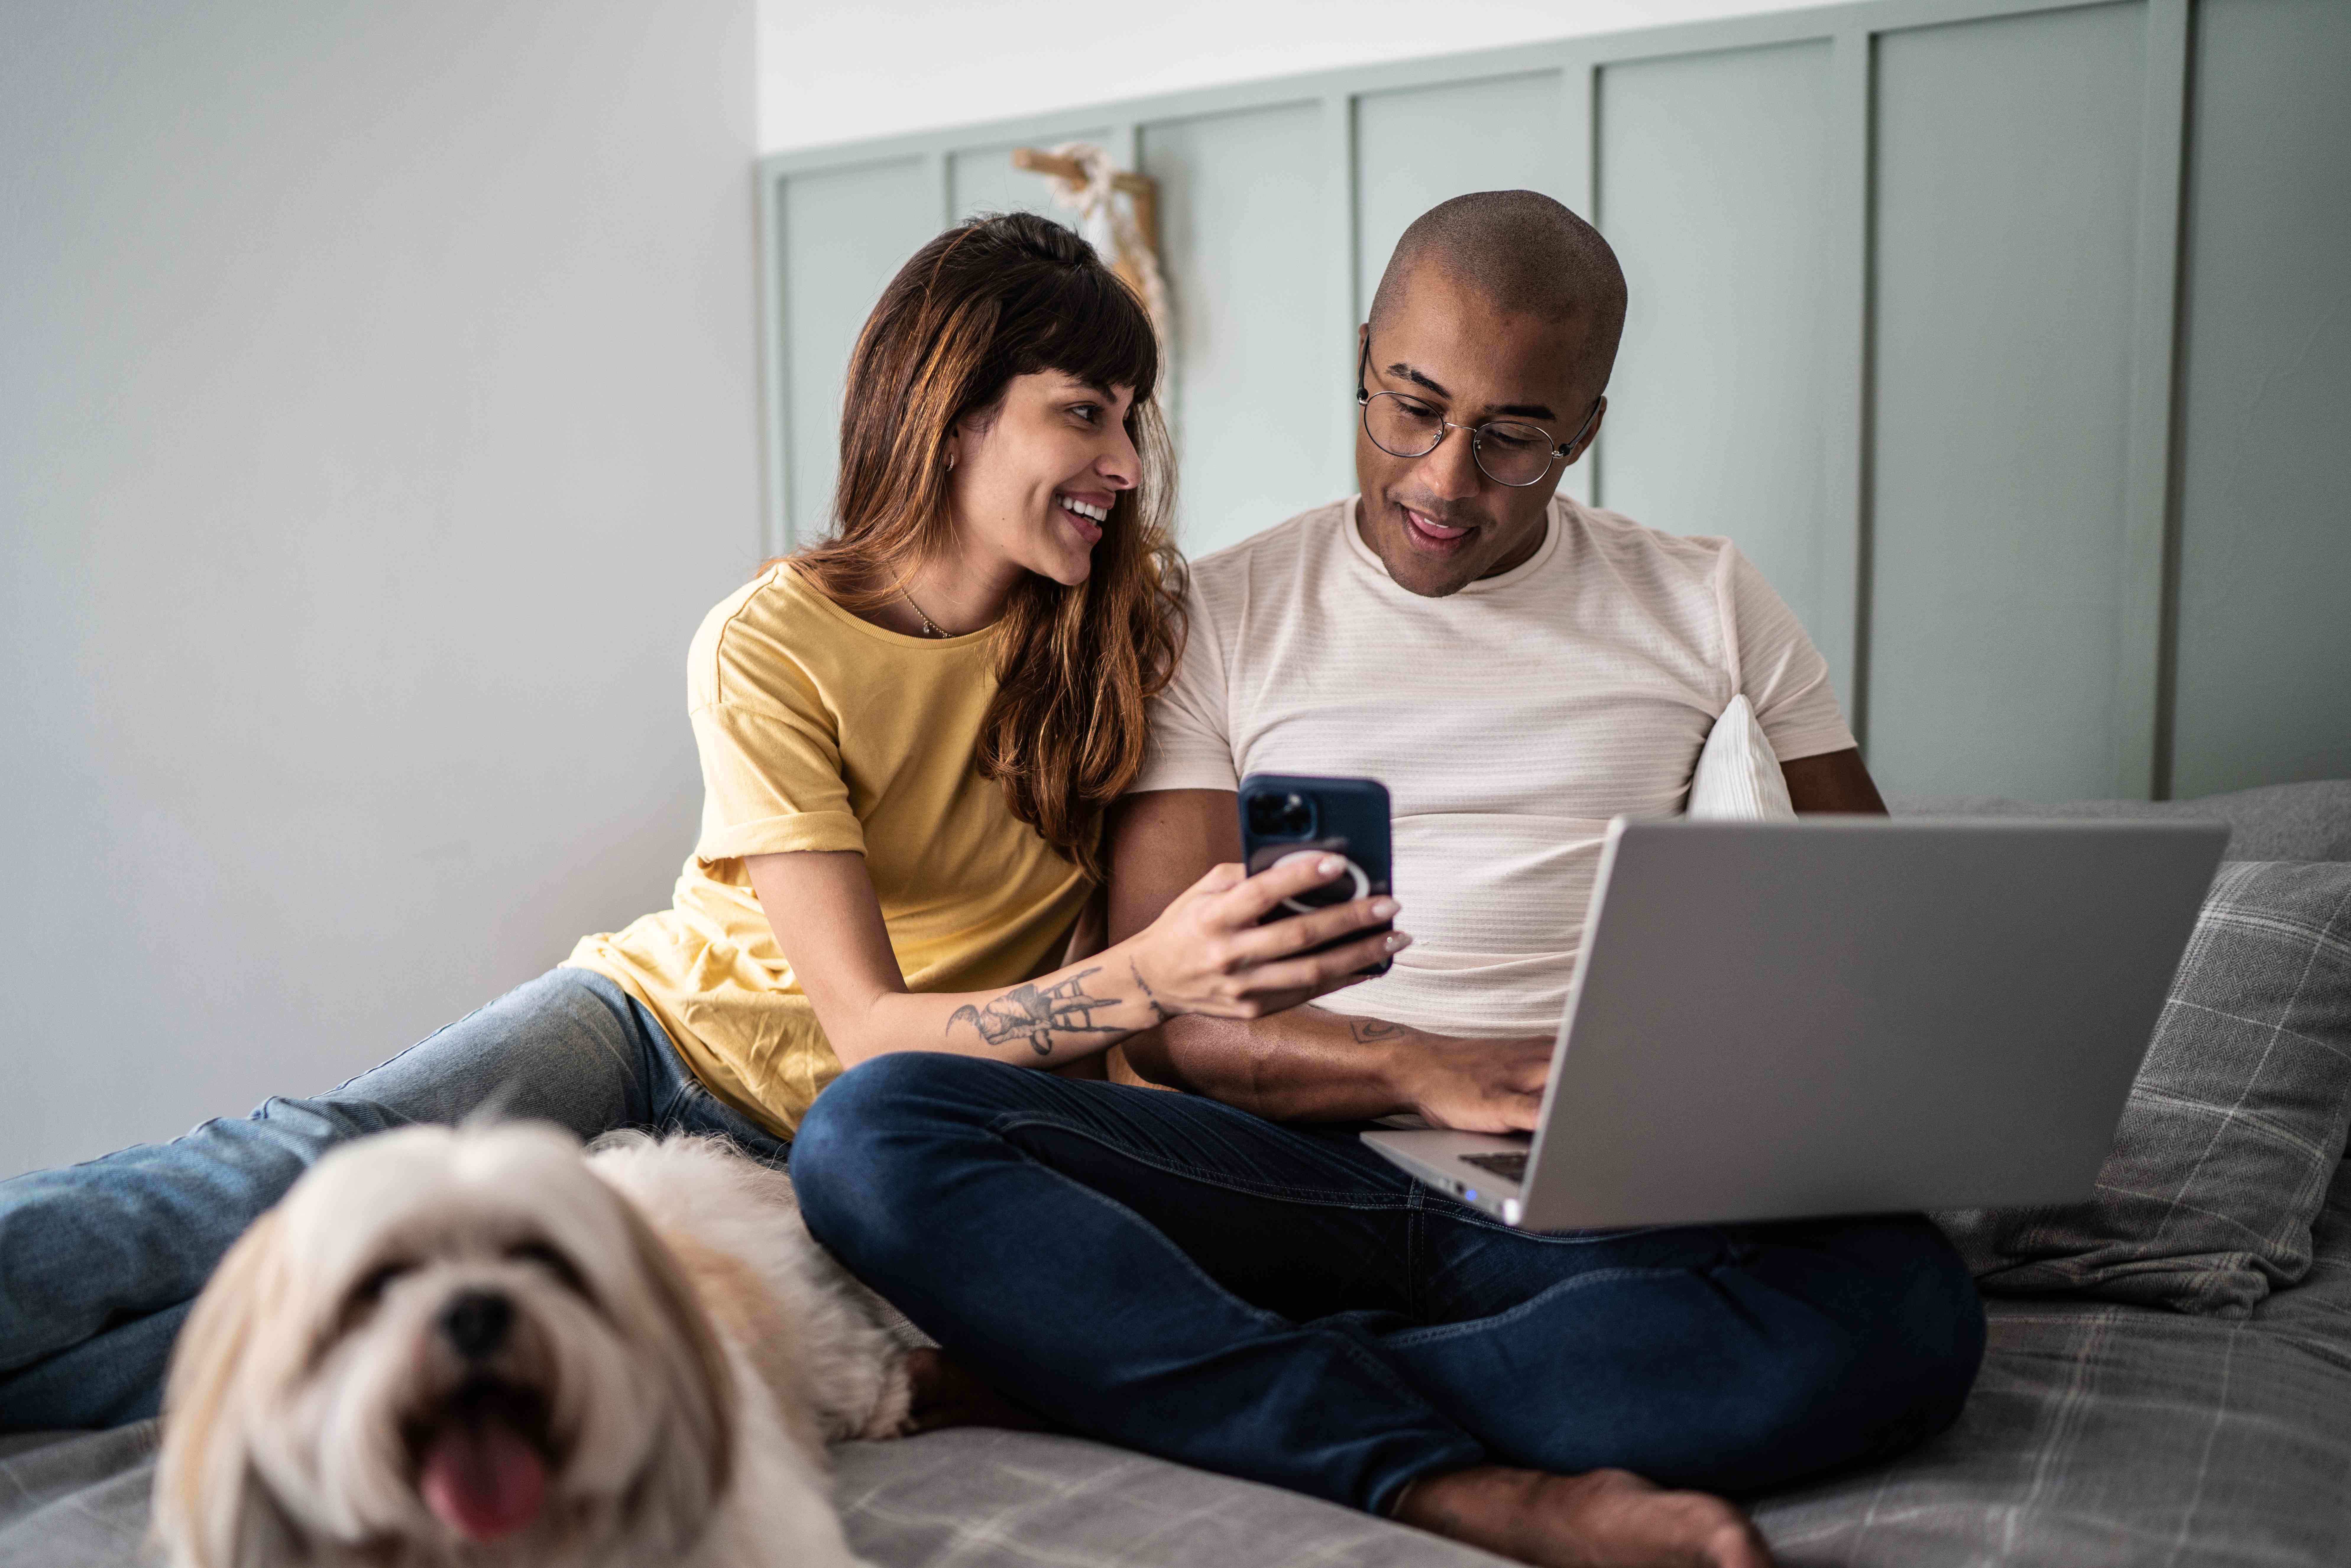 Young woman smiling as she shows something to her male partner on her phone, while sitting on the bed with a dog